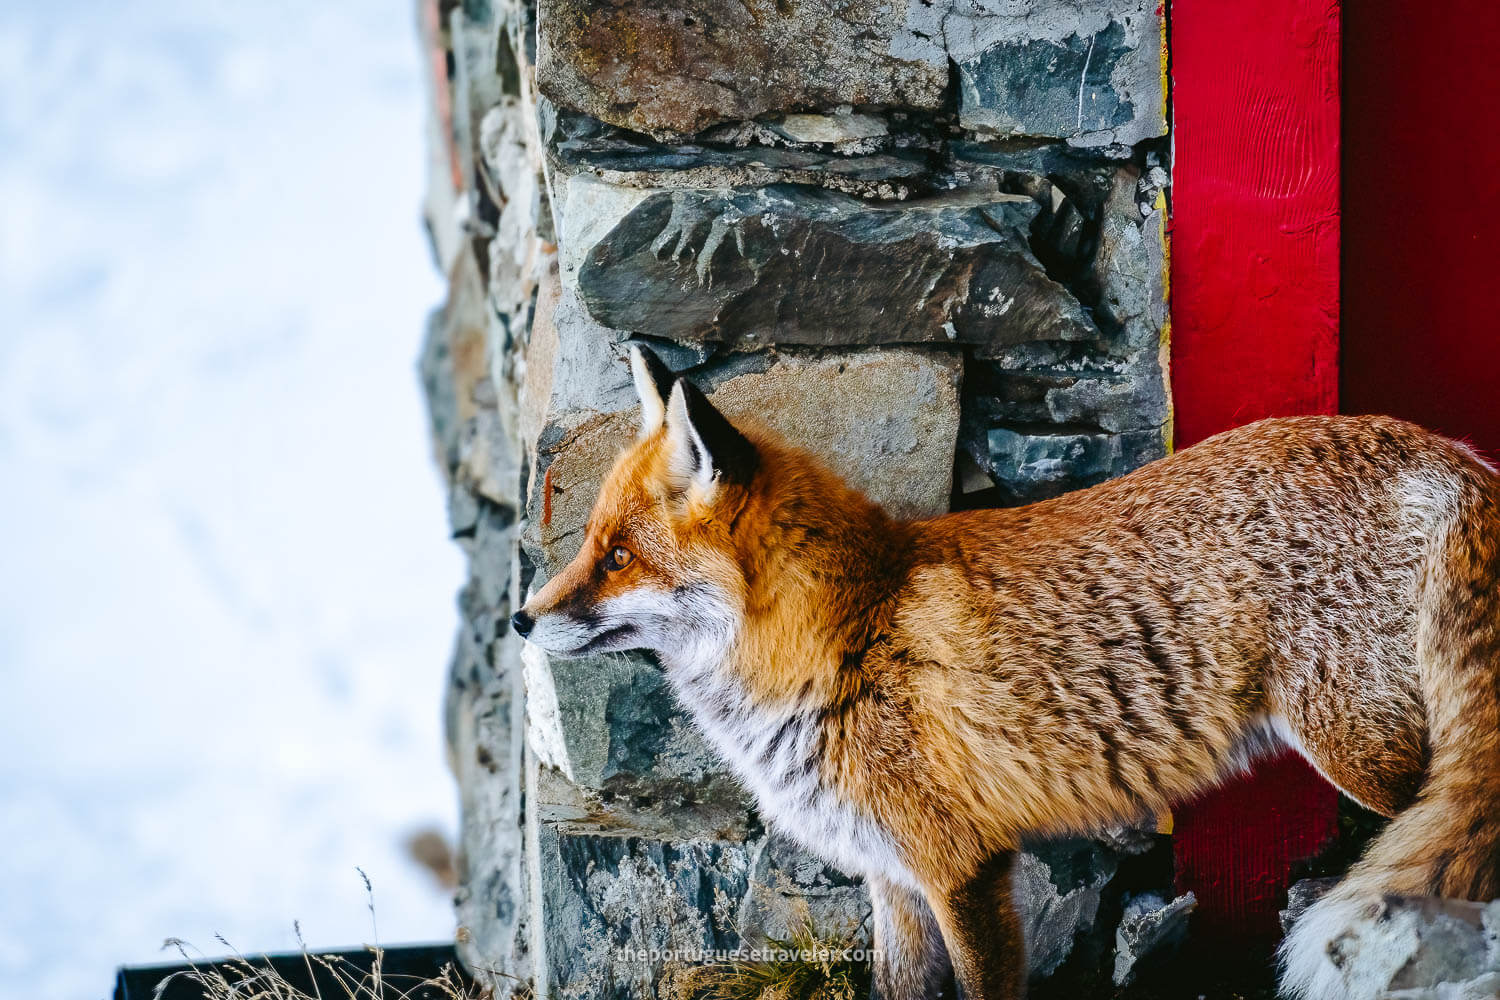 A fox at the Muttsee Hut